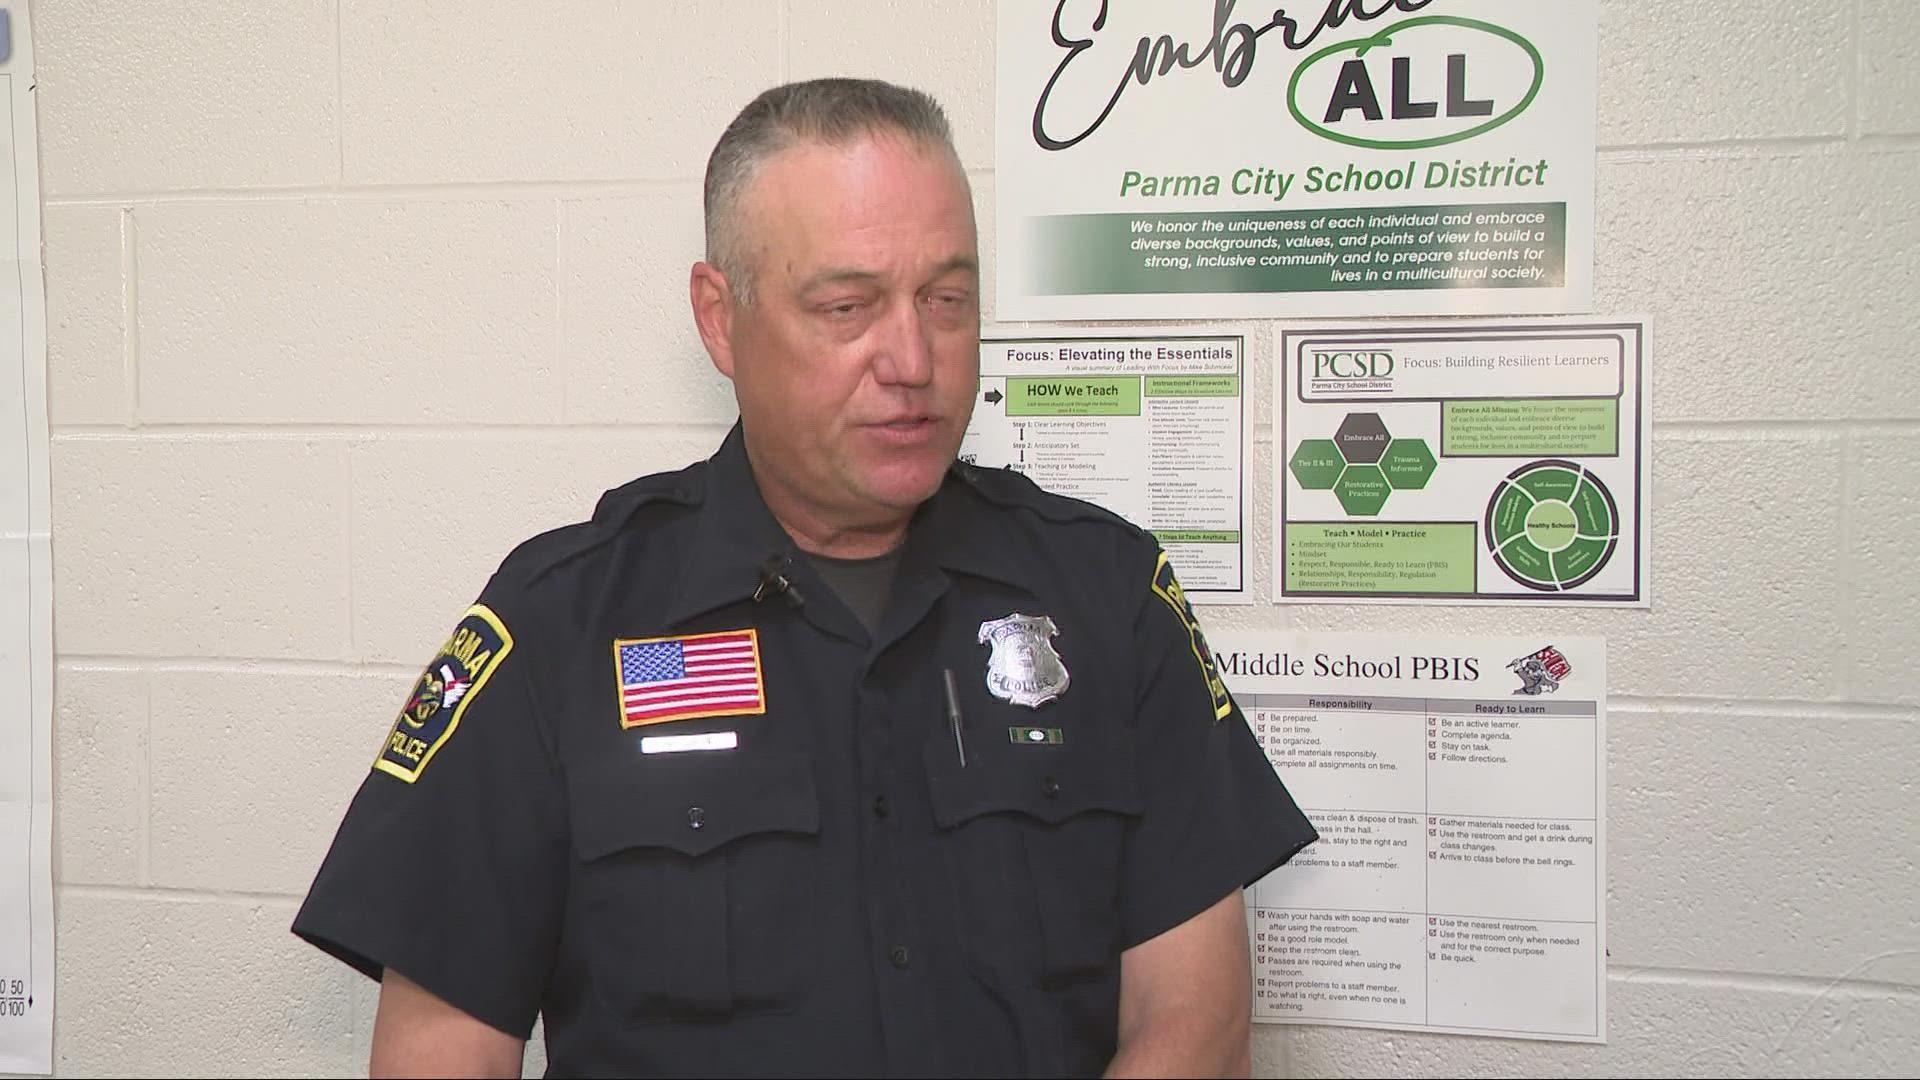 3News' Isabel Lawrence spoke with an SRO in Parma about his role in schools.